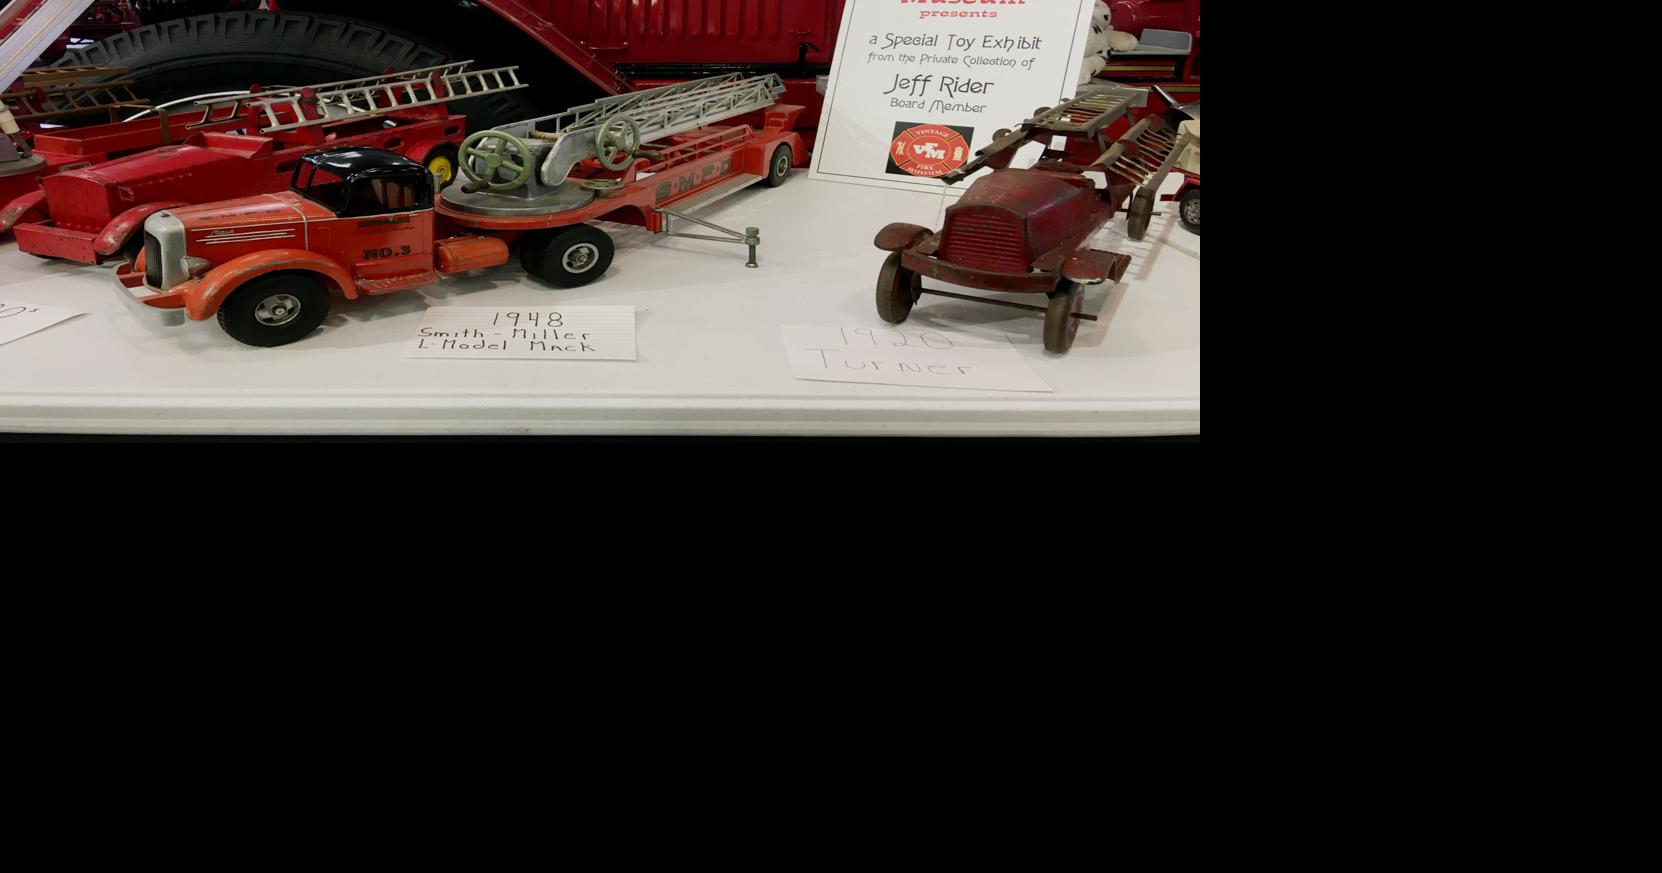 Fire museum forced to put vintage trucks up for sale in effort to stay open